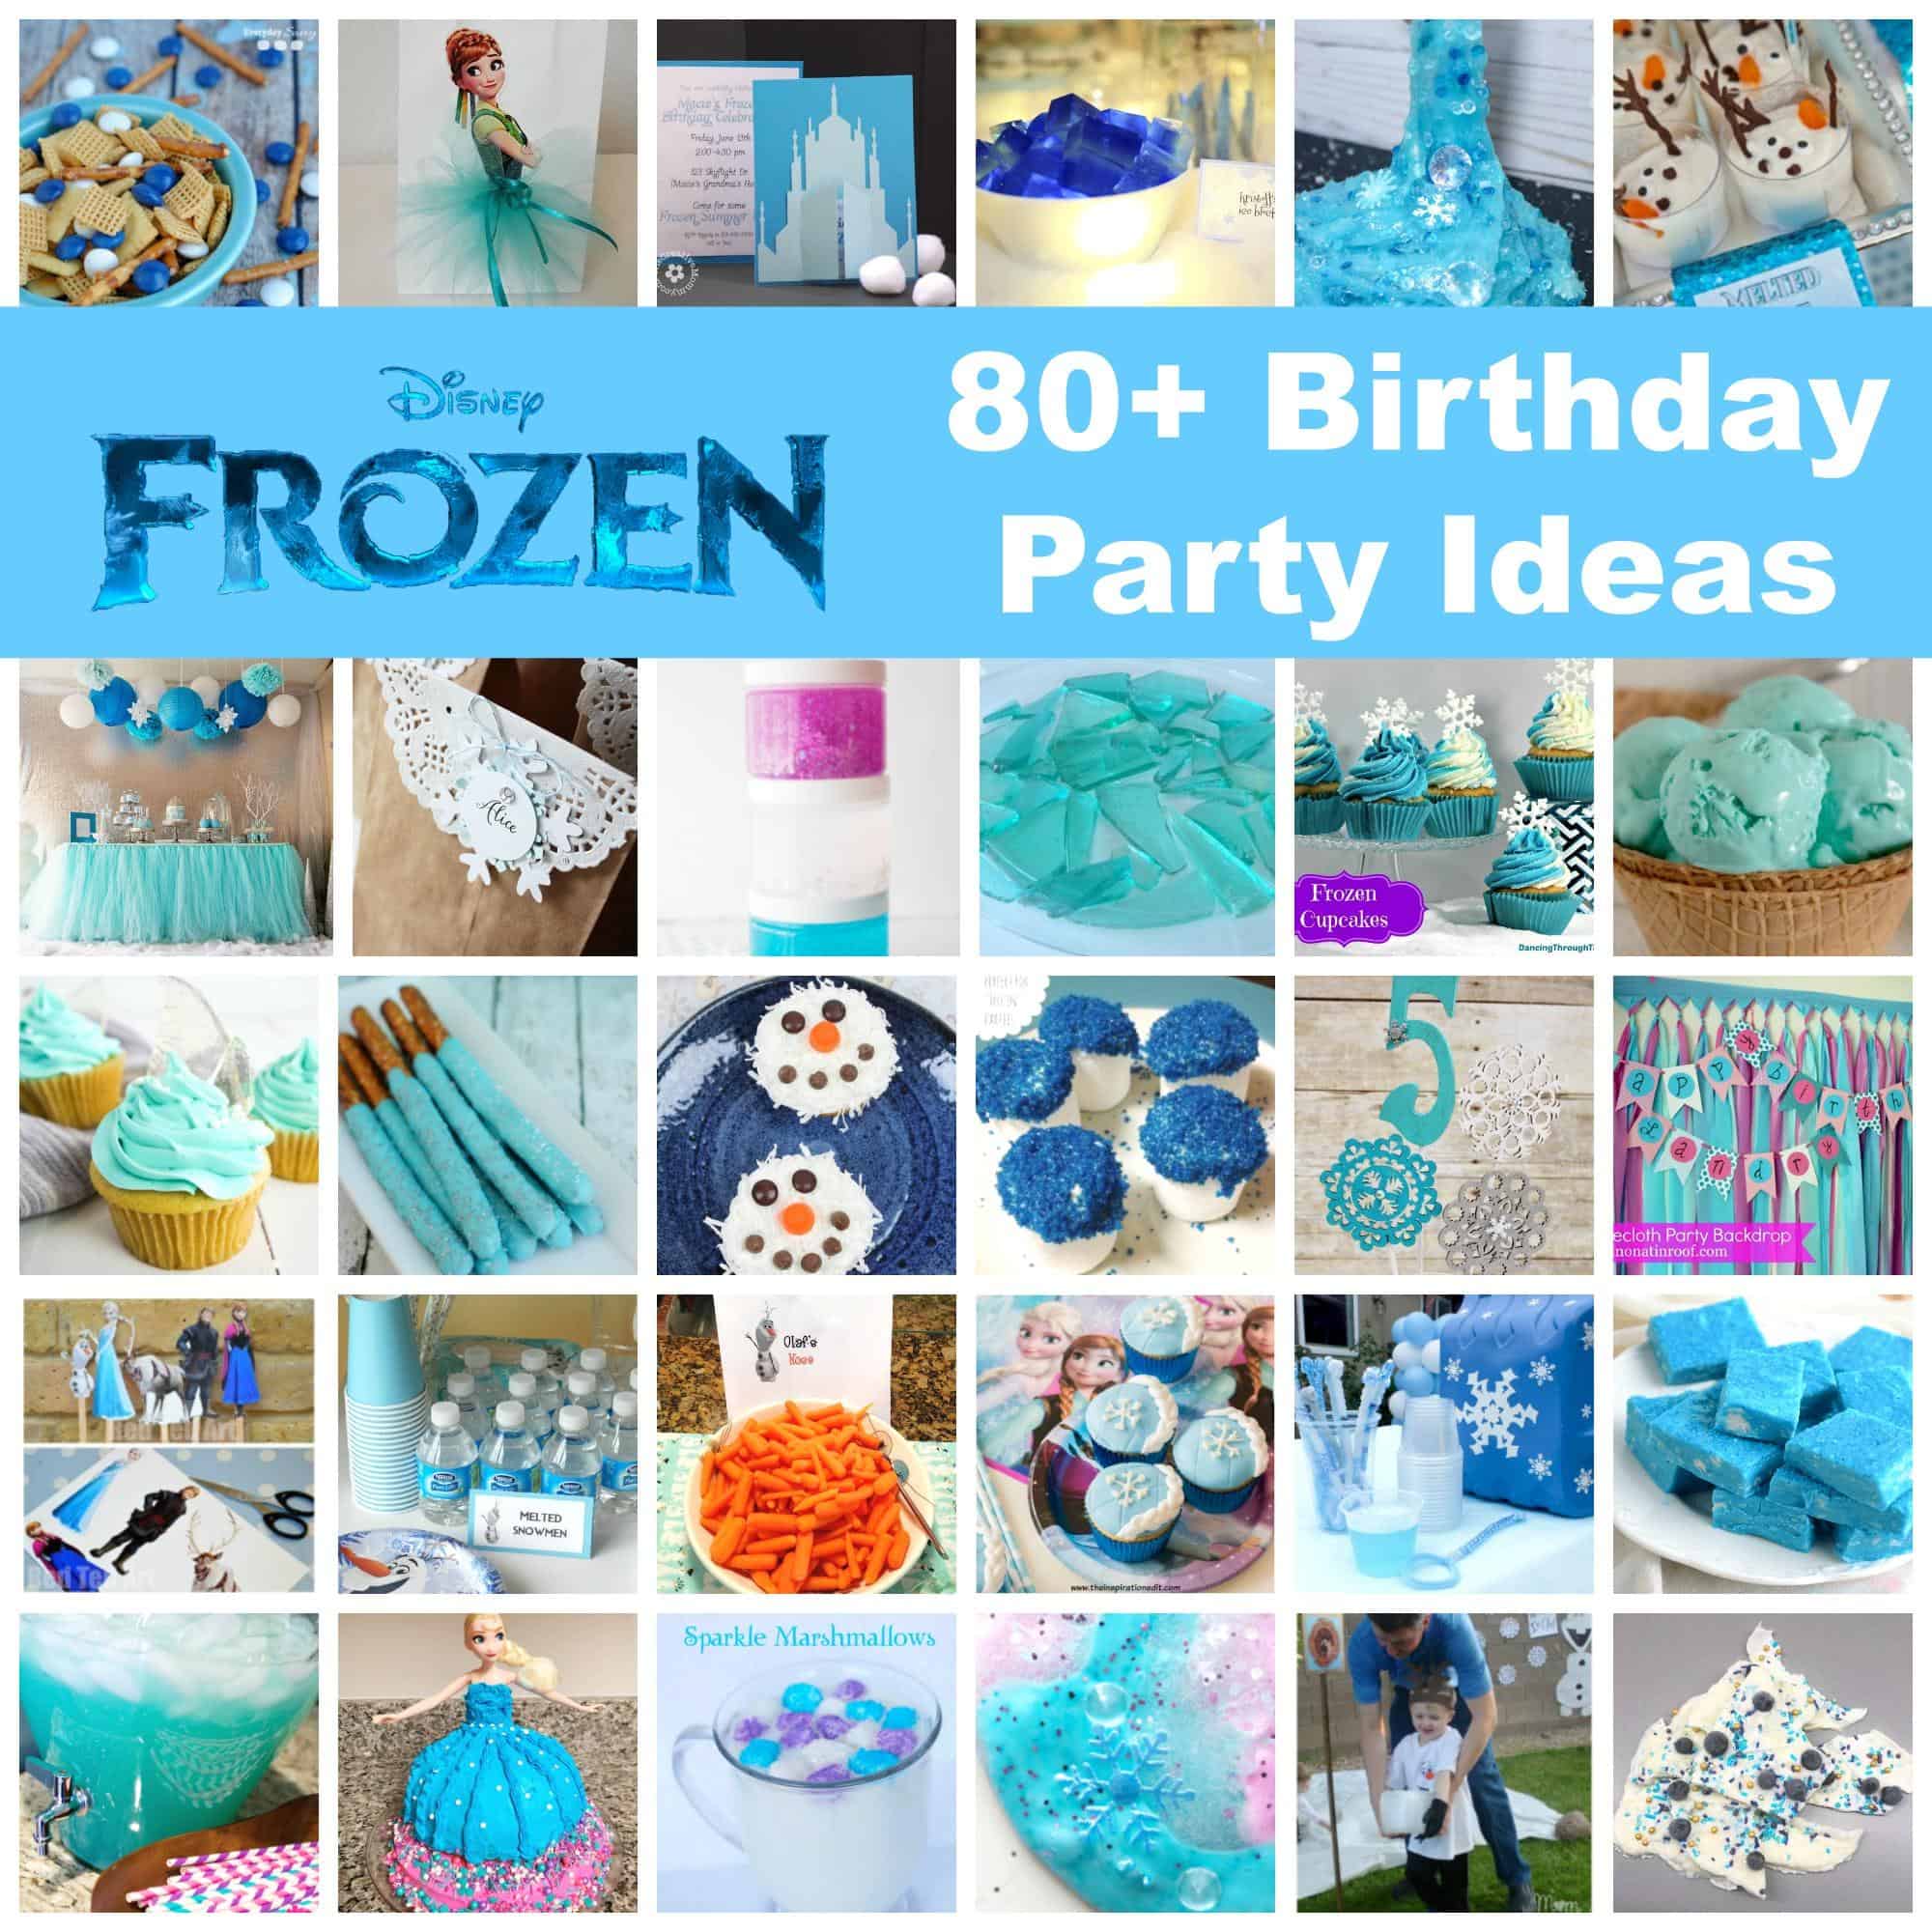 Party Favors & Bag Fillers Frozen Disney Stationery Pen Pencil Notebook  Ruler Eraser Lead Party Bag Fillers Greeting Cards & Party Supplies